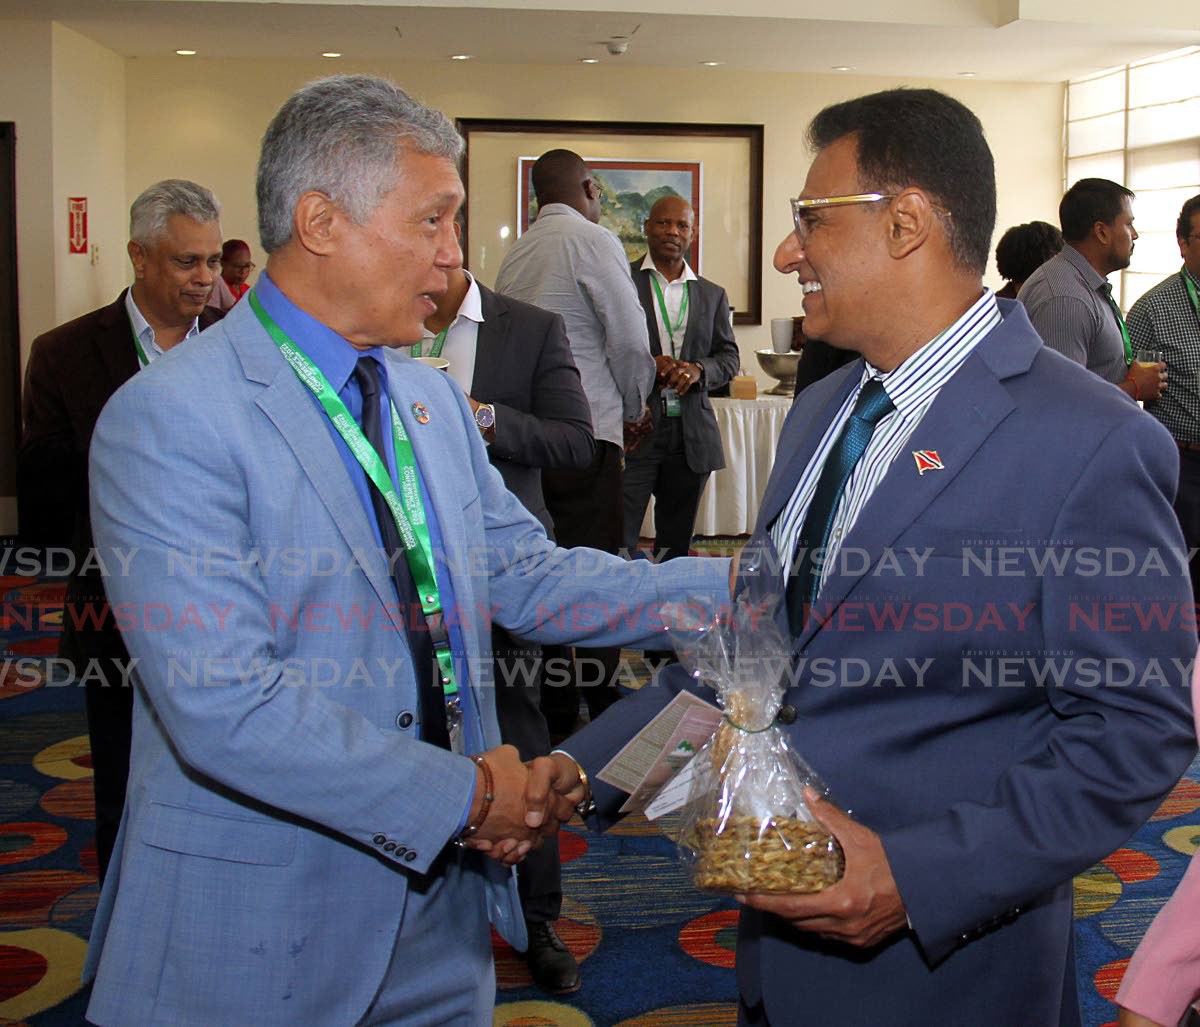 Minister of Works and Transport Rohan Sinanan, right, is greeted by senator Anthony Vieria during the IAMovement Green Infrastructure Conference at Hilton, Port of Spain. 2022.10.25